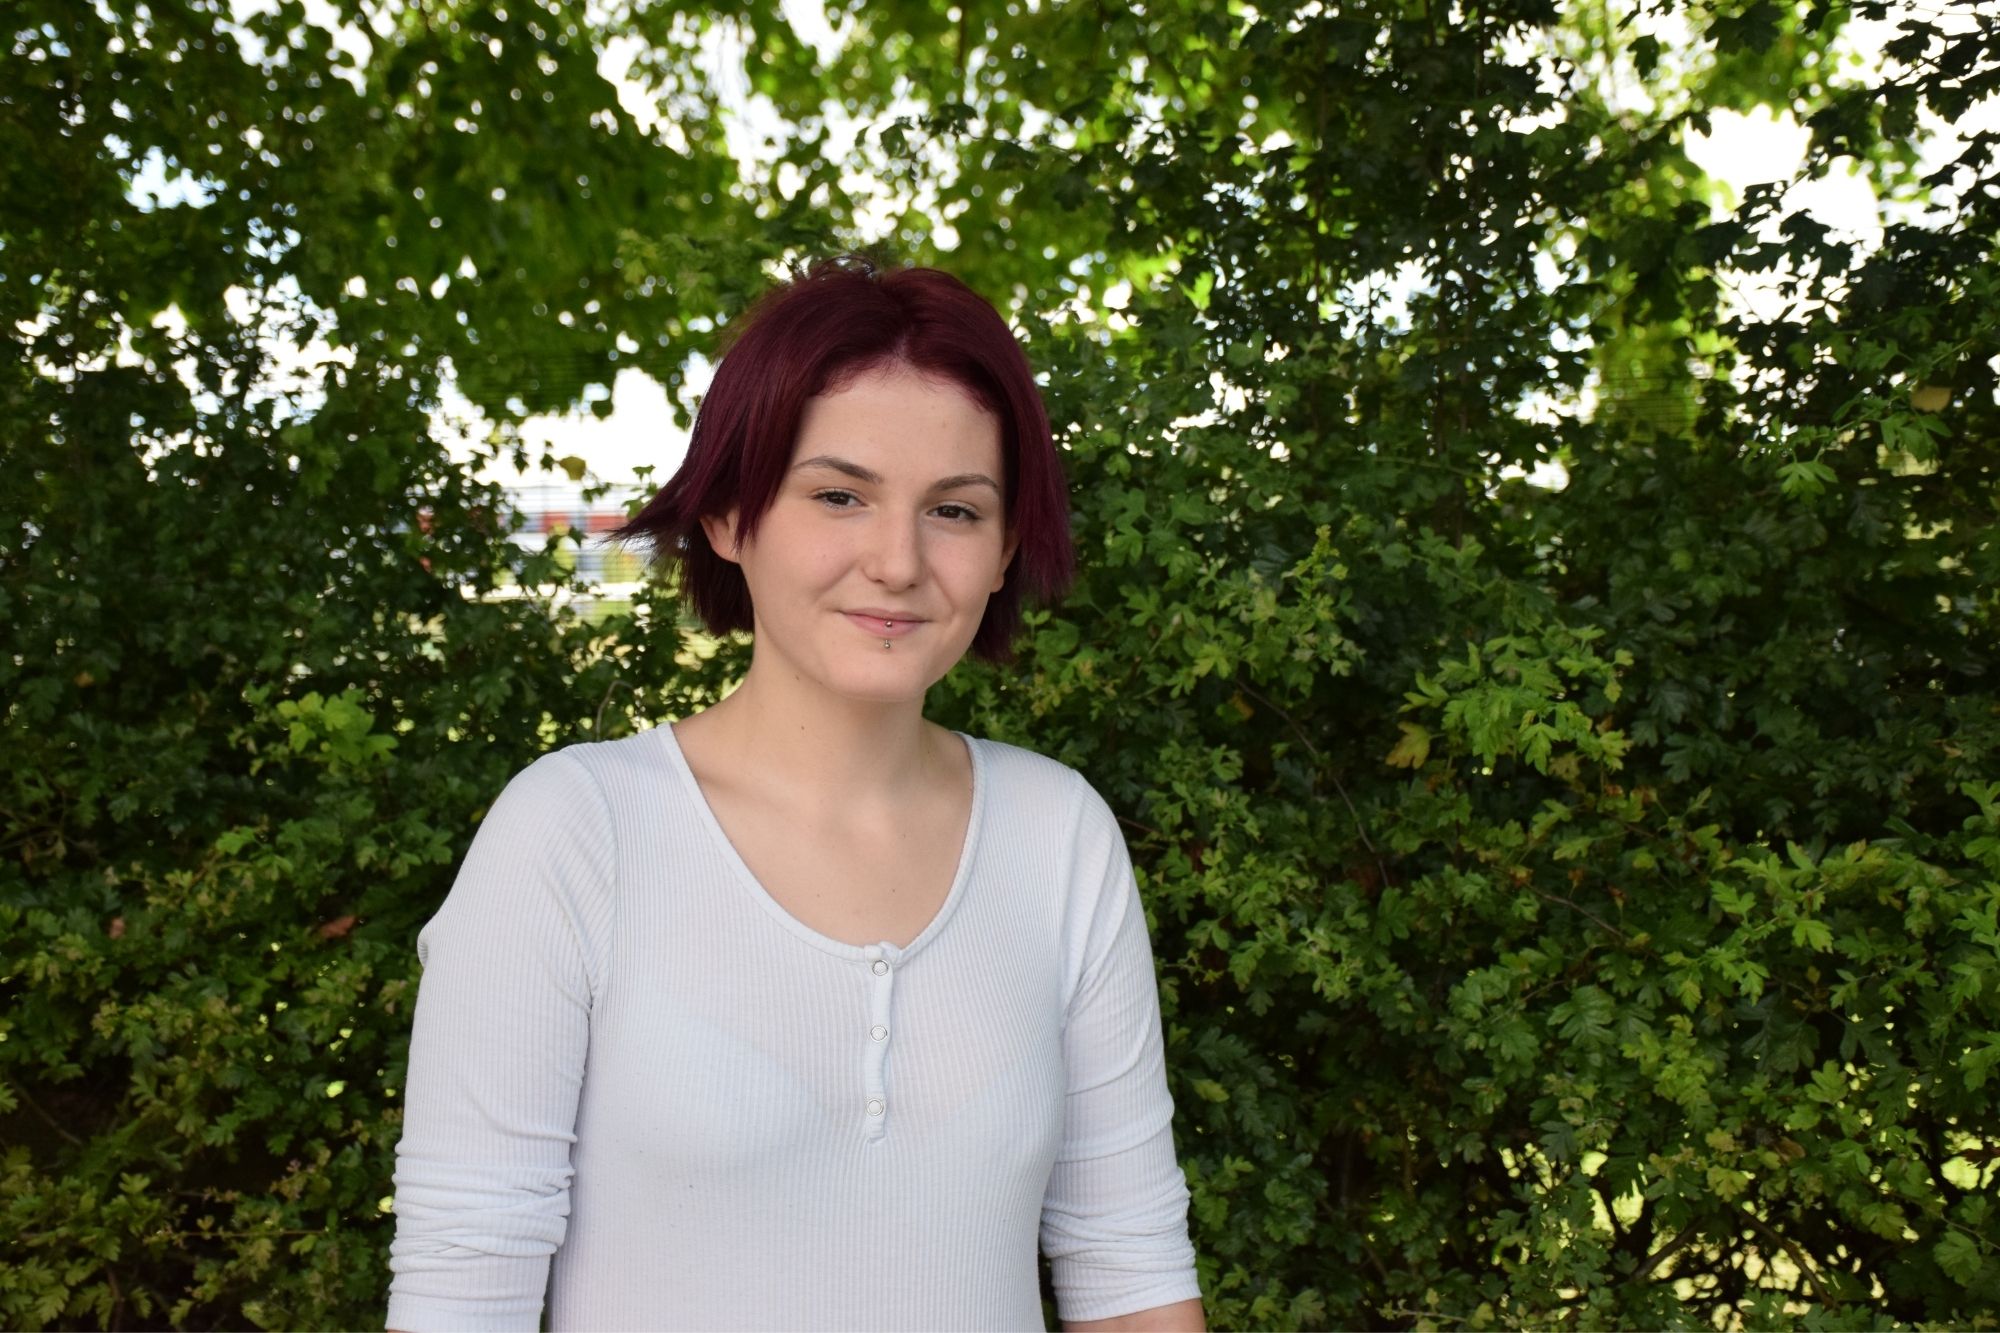 Lily scores an A grade at Accrington and Rossendale College to pursue a career in social work